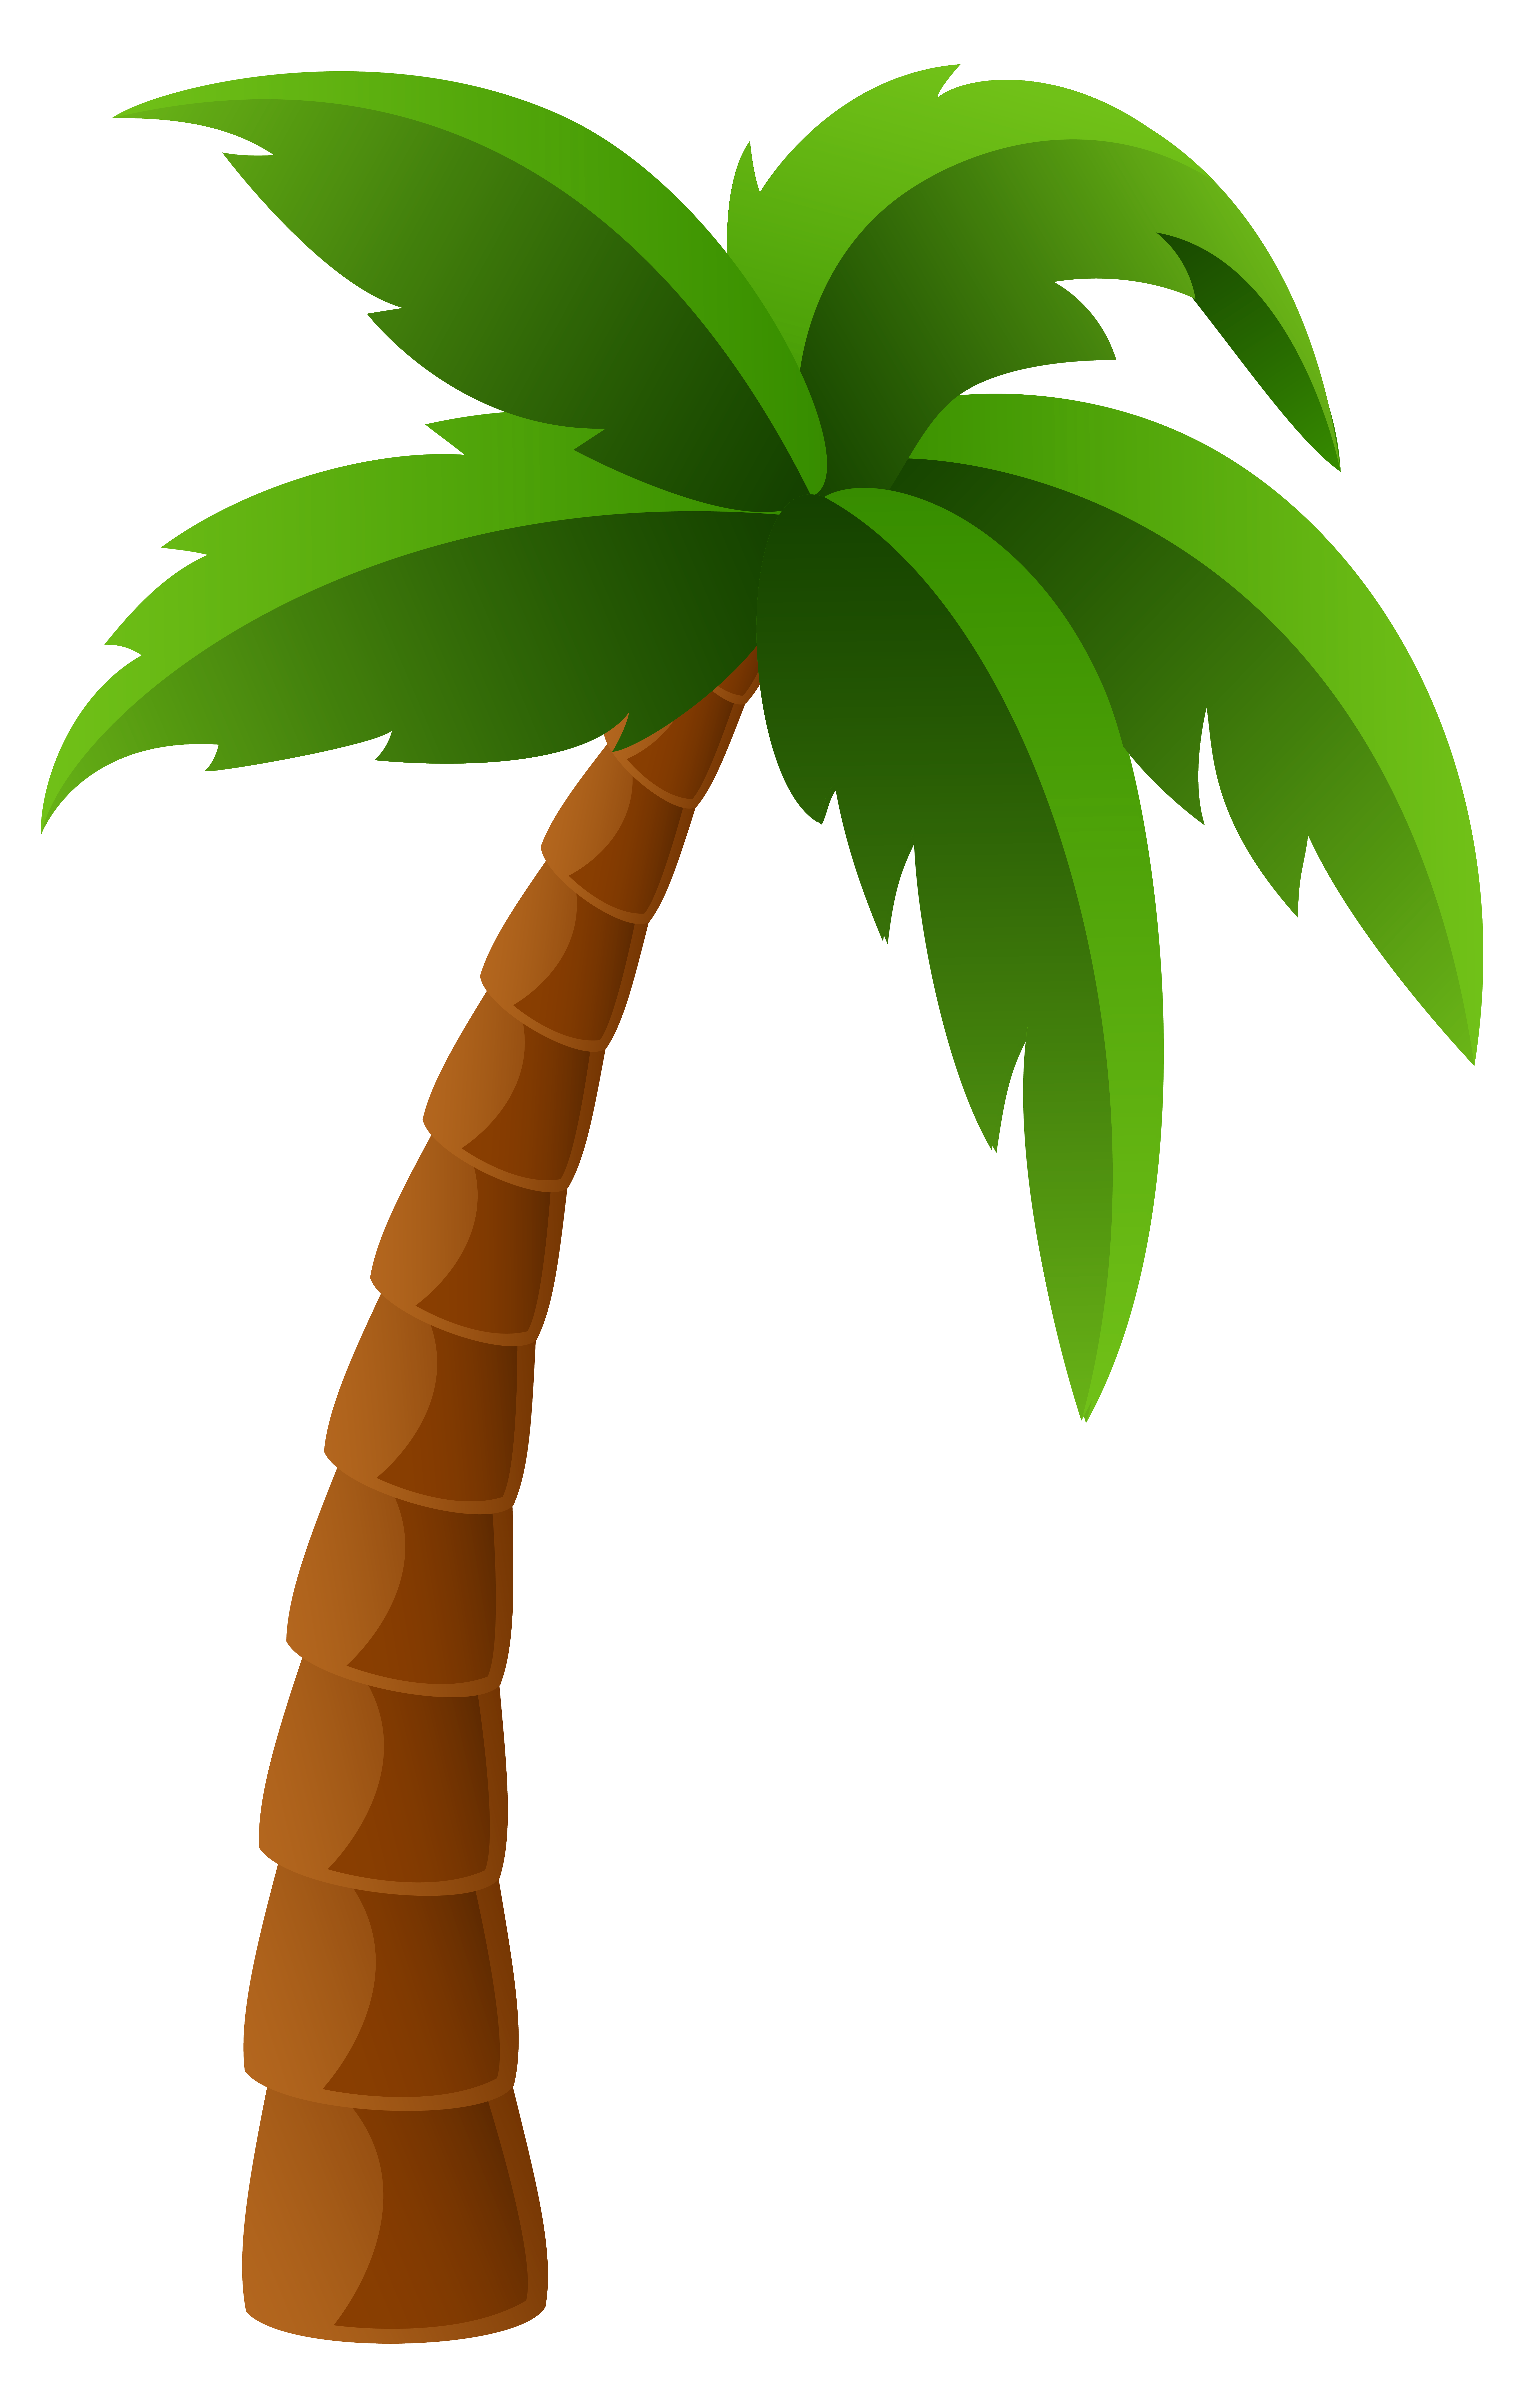 Palm tree clipart no background.